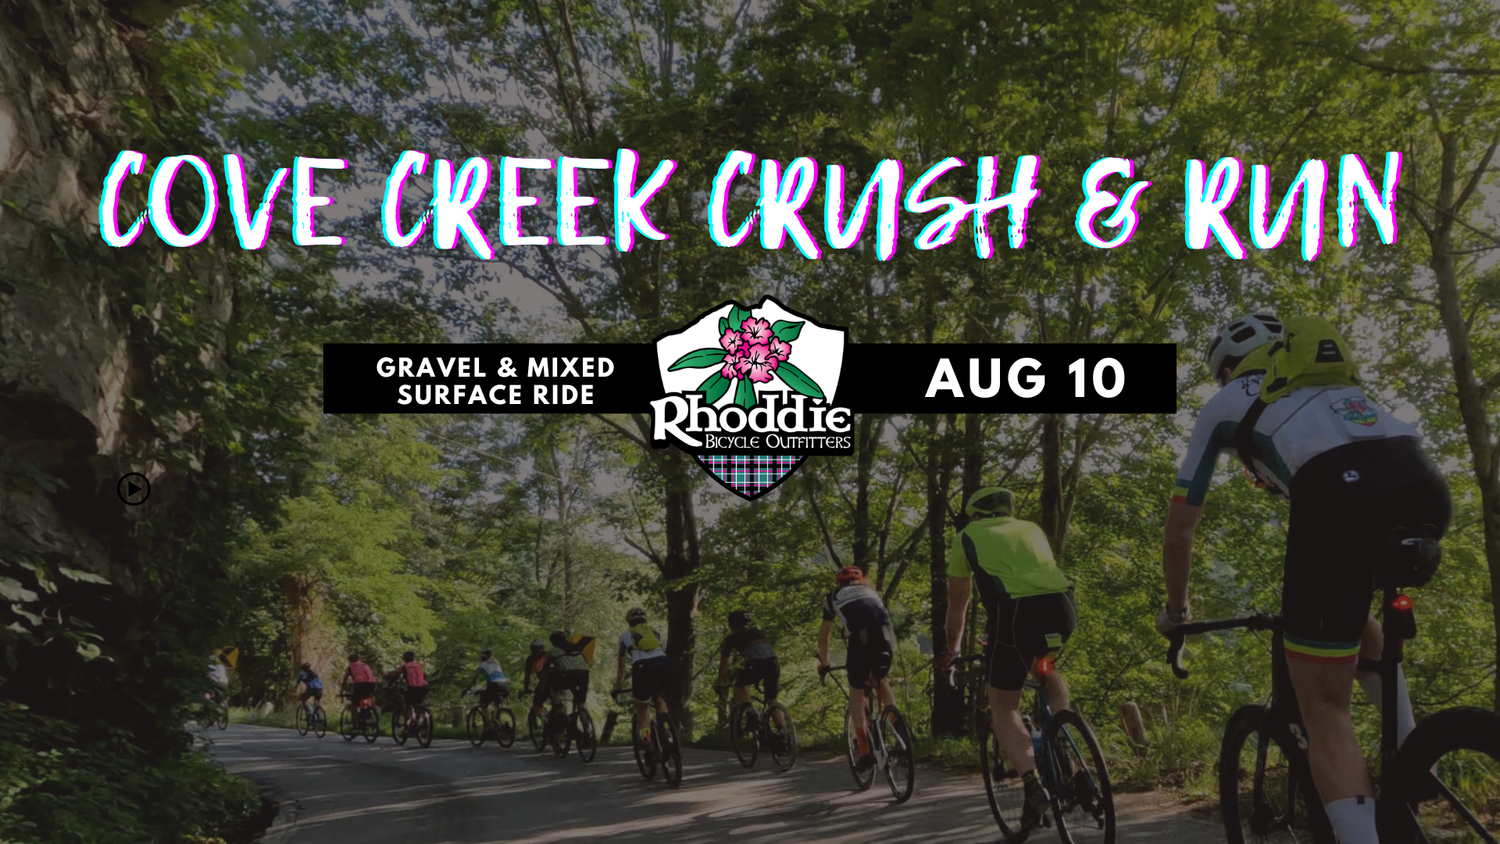 Cove Creek Crush & Run with Rhoddie Bicycle Outfitters